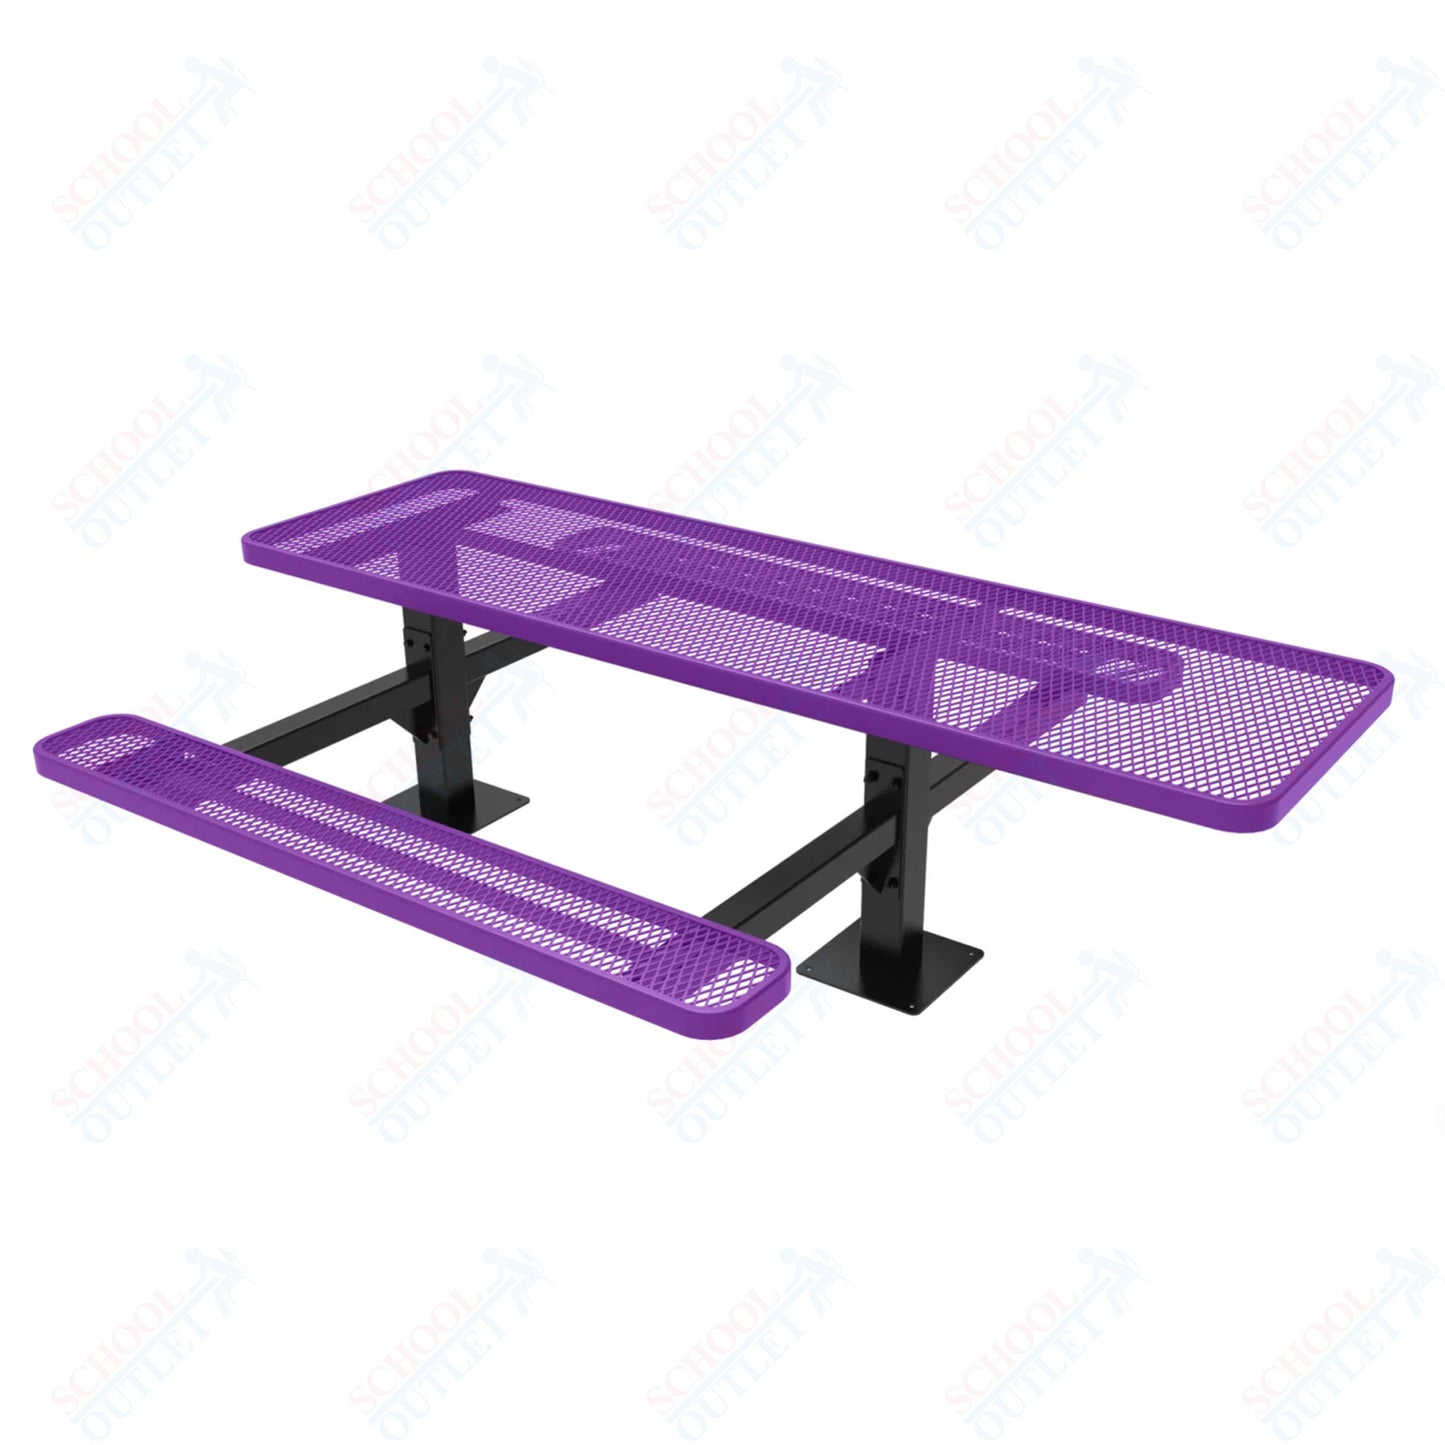 MyTcoat MYT-TRT08-09-001 8' Rectangular Double Pedestal Picnic Table with Surface Mount and ADA Accessible (96"W x 75.5"D x 30"H)